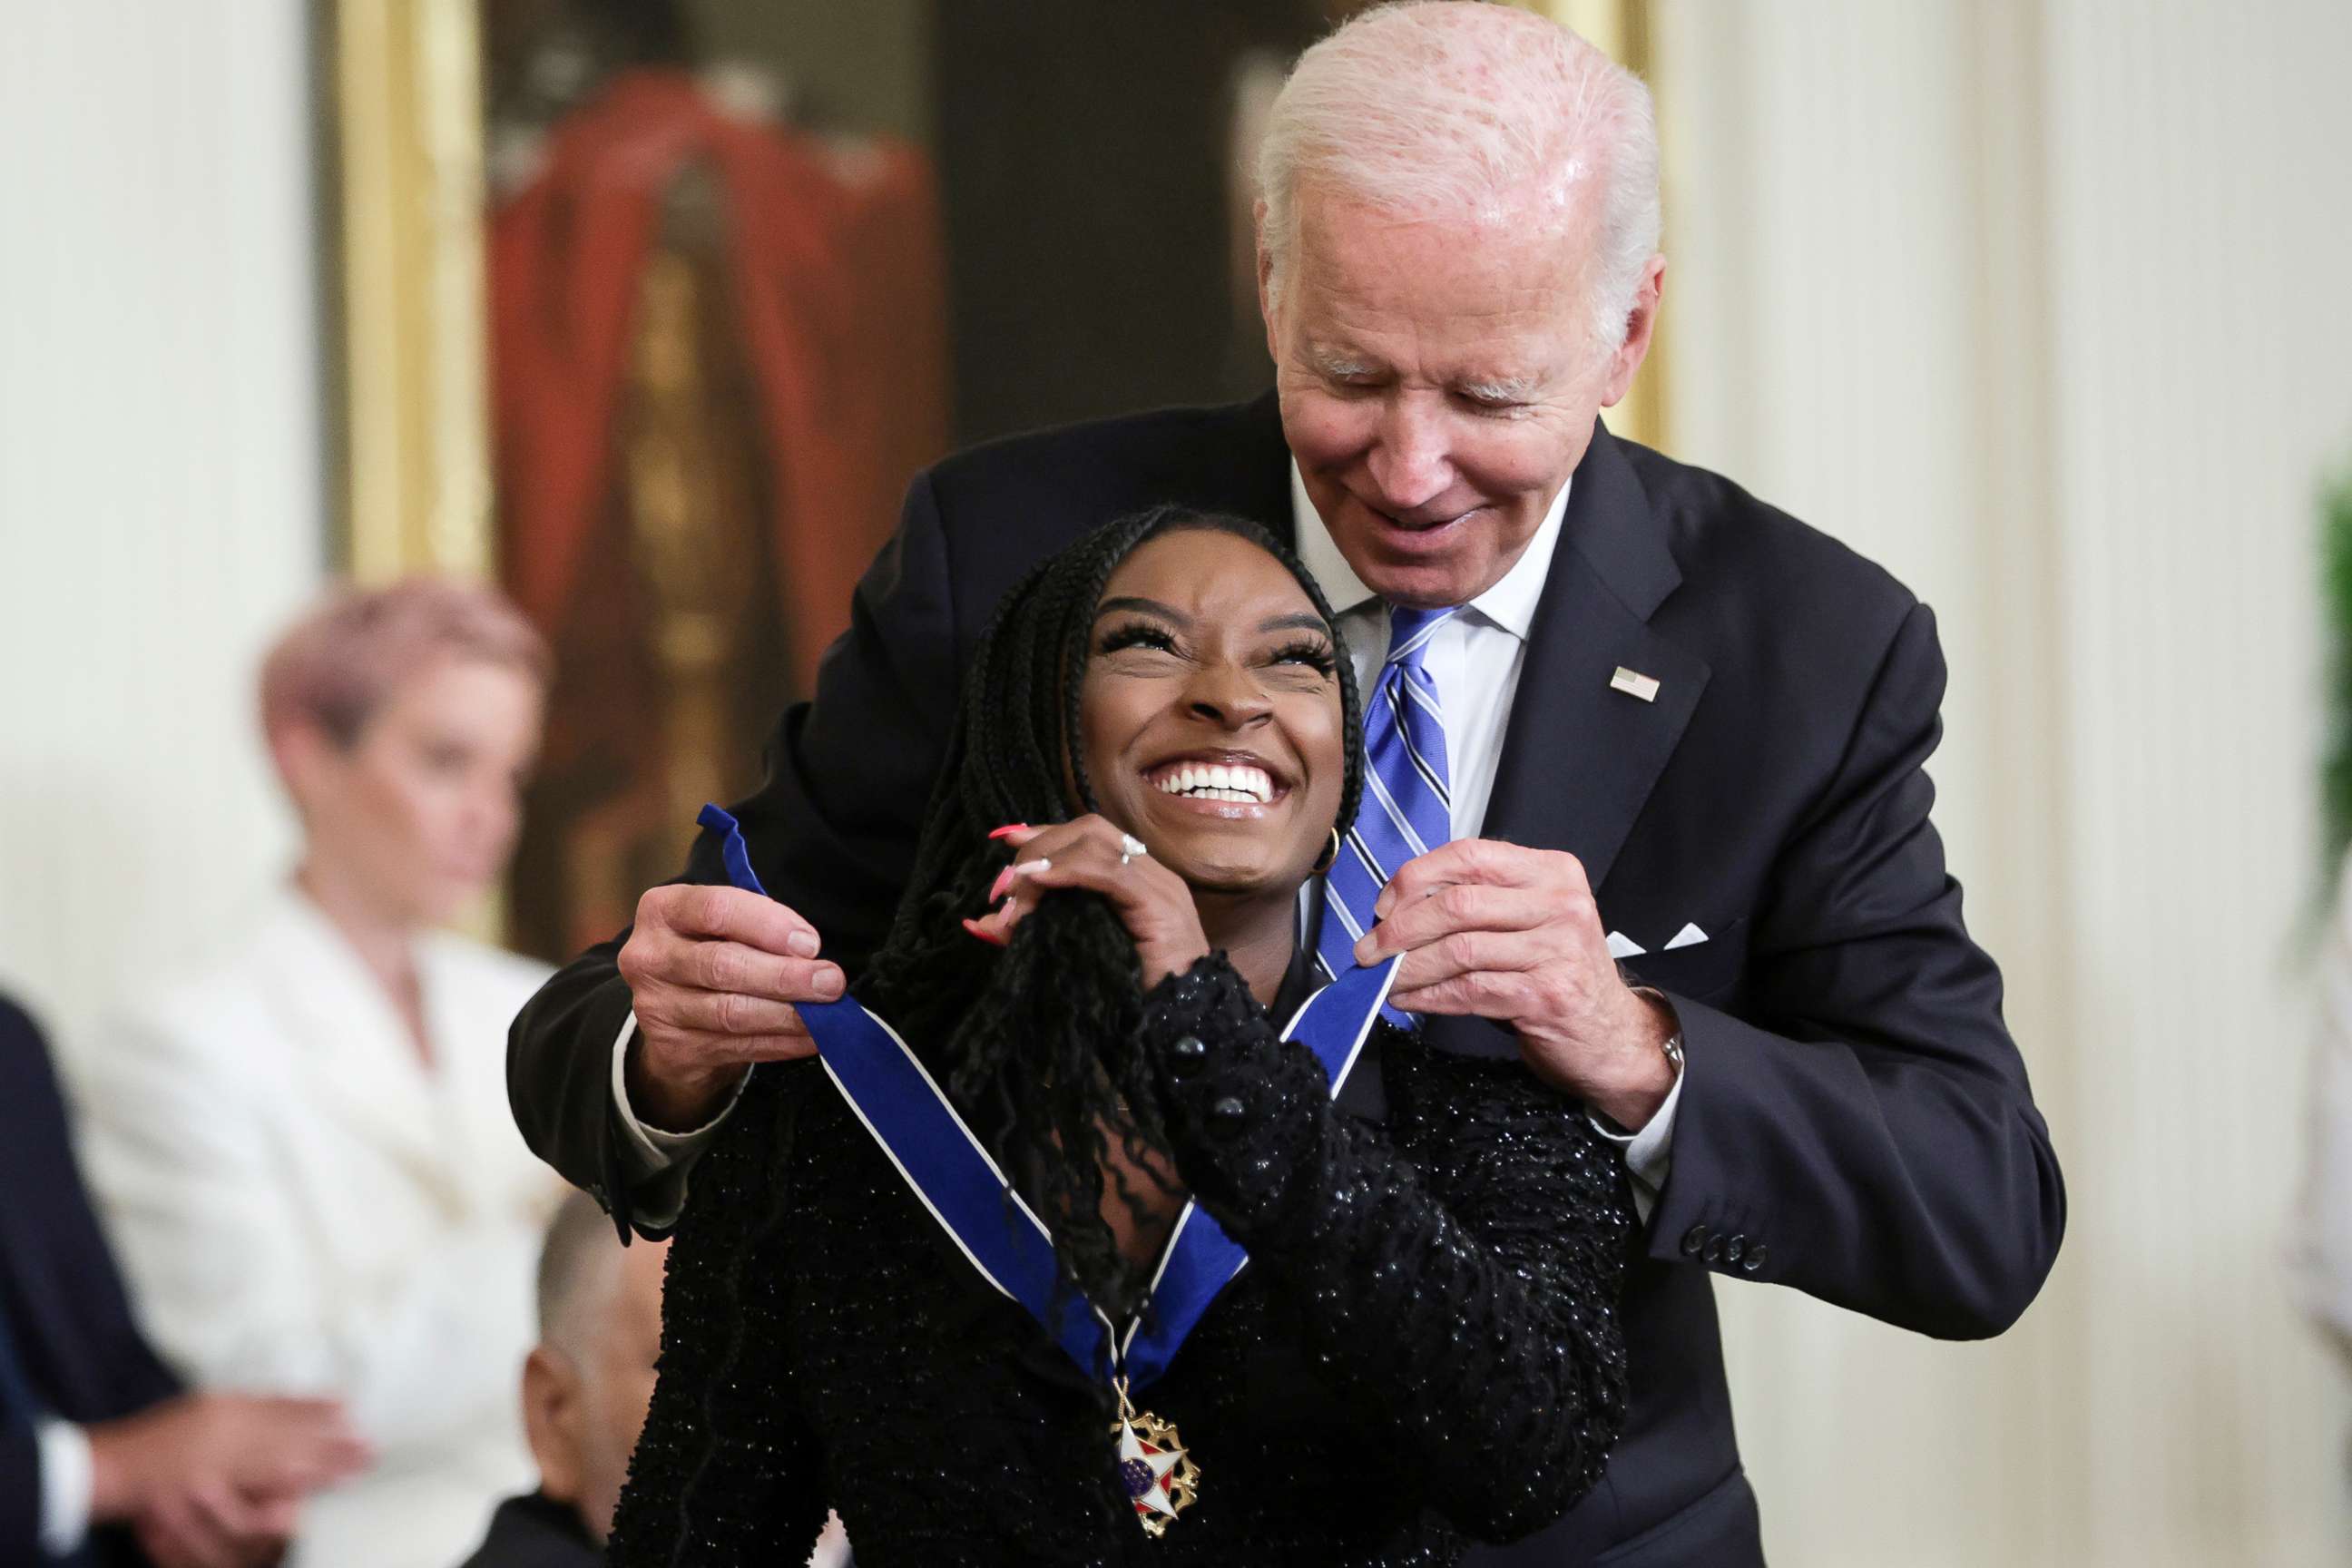 PHOTO: President Joe Biden presents the Presidential Medal of Freedom to Simone Biles, Olympic gold medal gymnast and mental health advocate, during a ceremony in the East Room of the White House, July 7, 2022, in Washington, D.C.